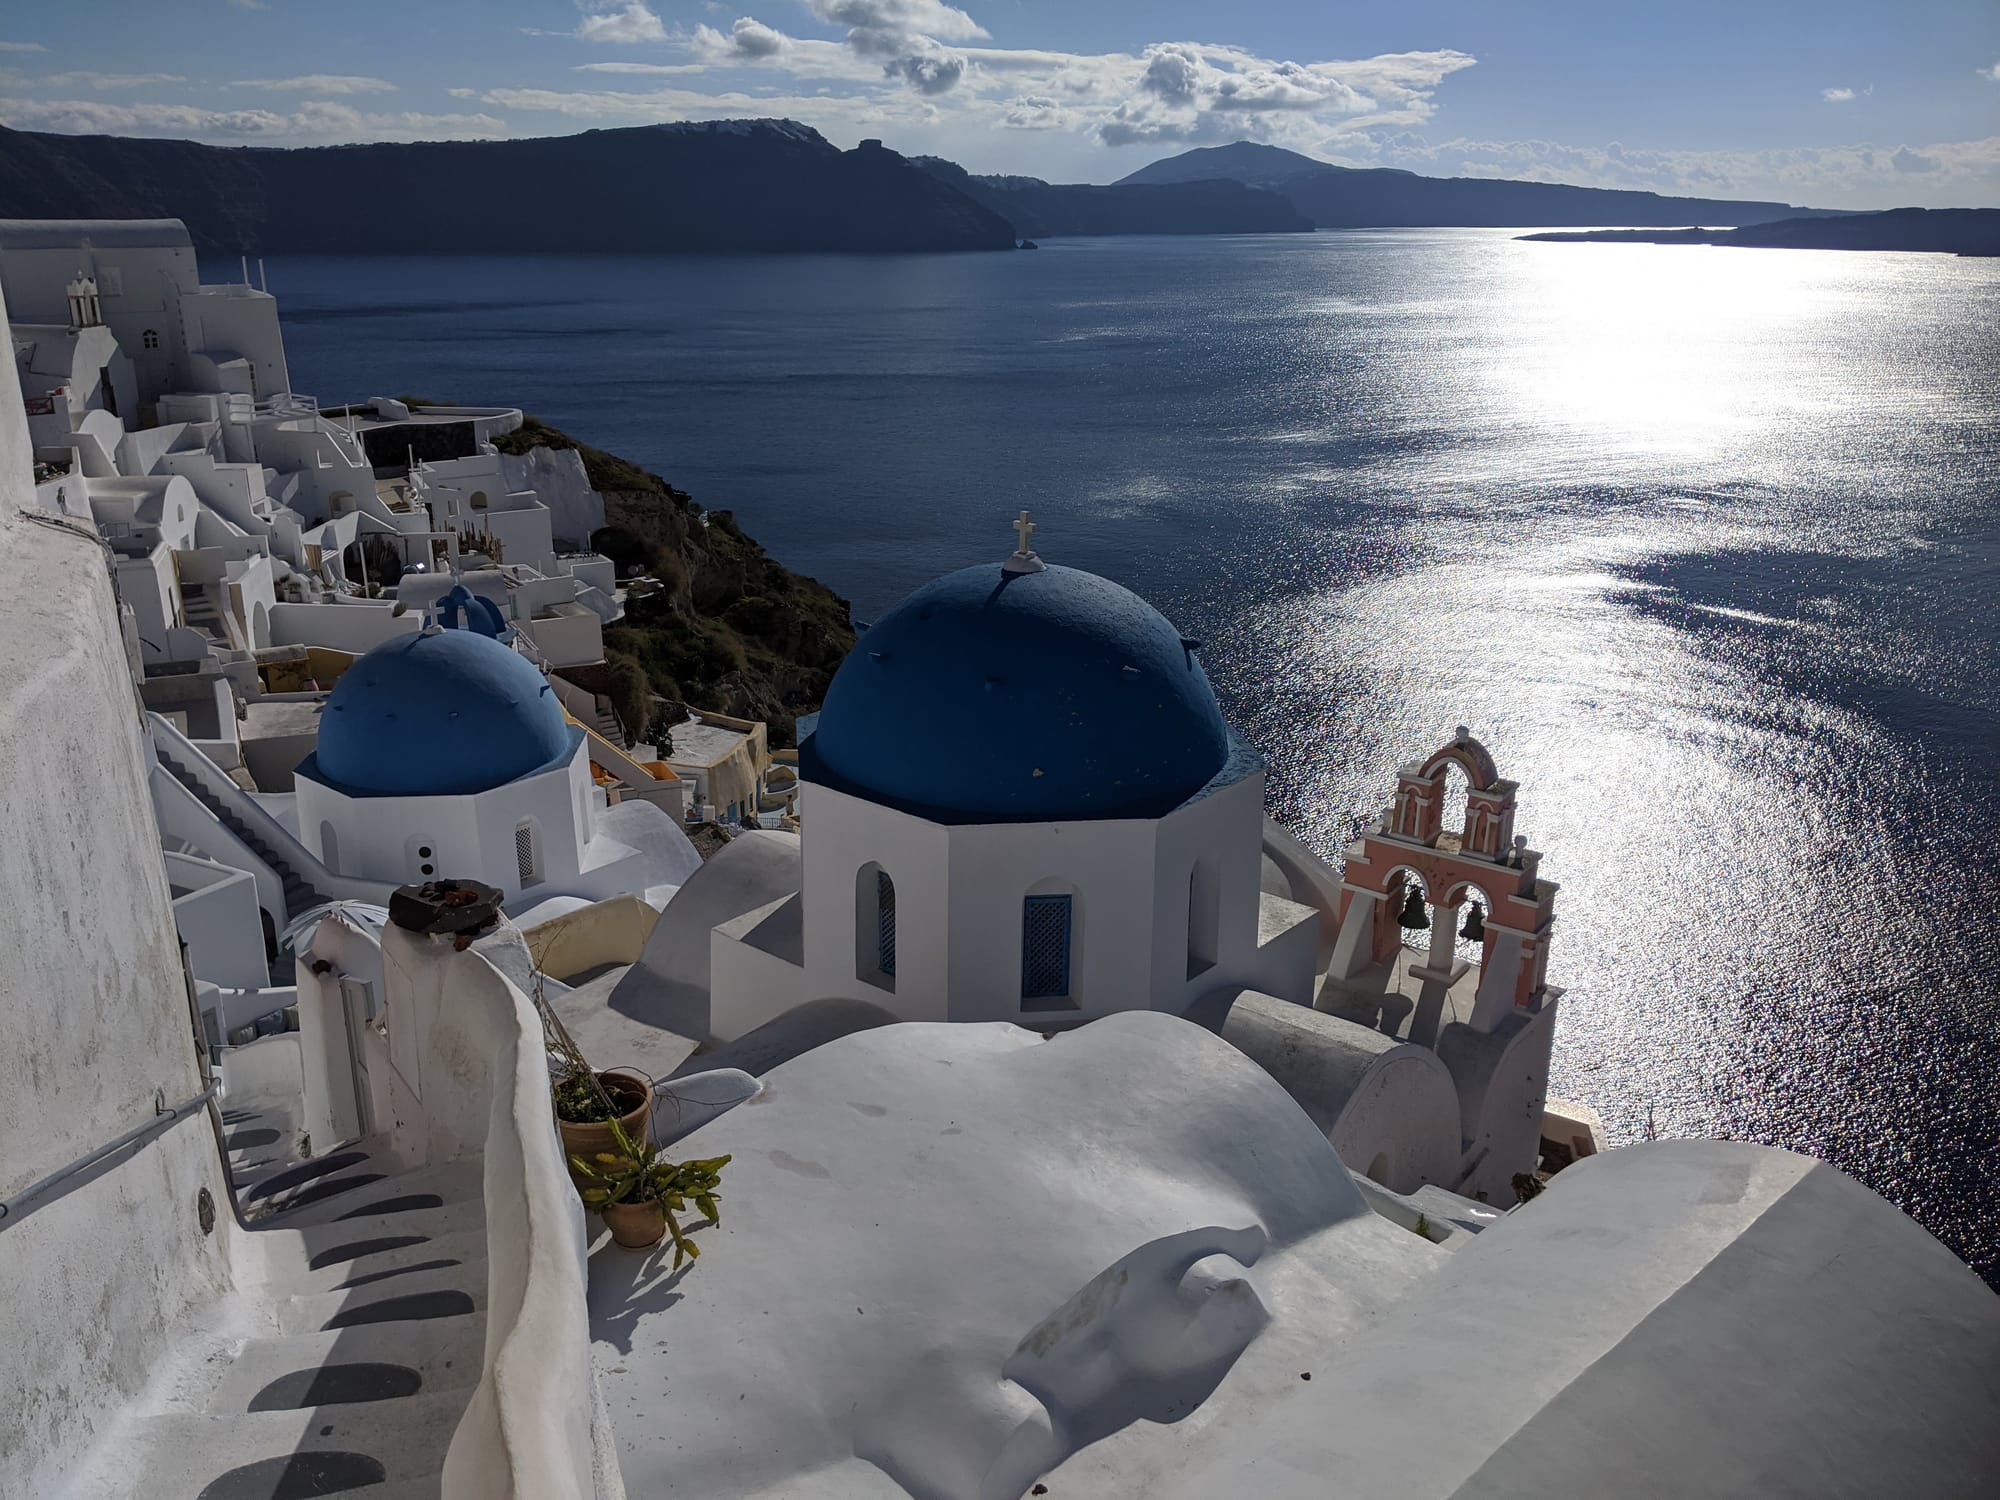 Santorini: one of the most magnificent places we ever visited